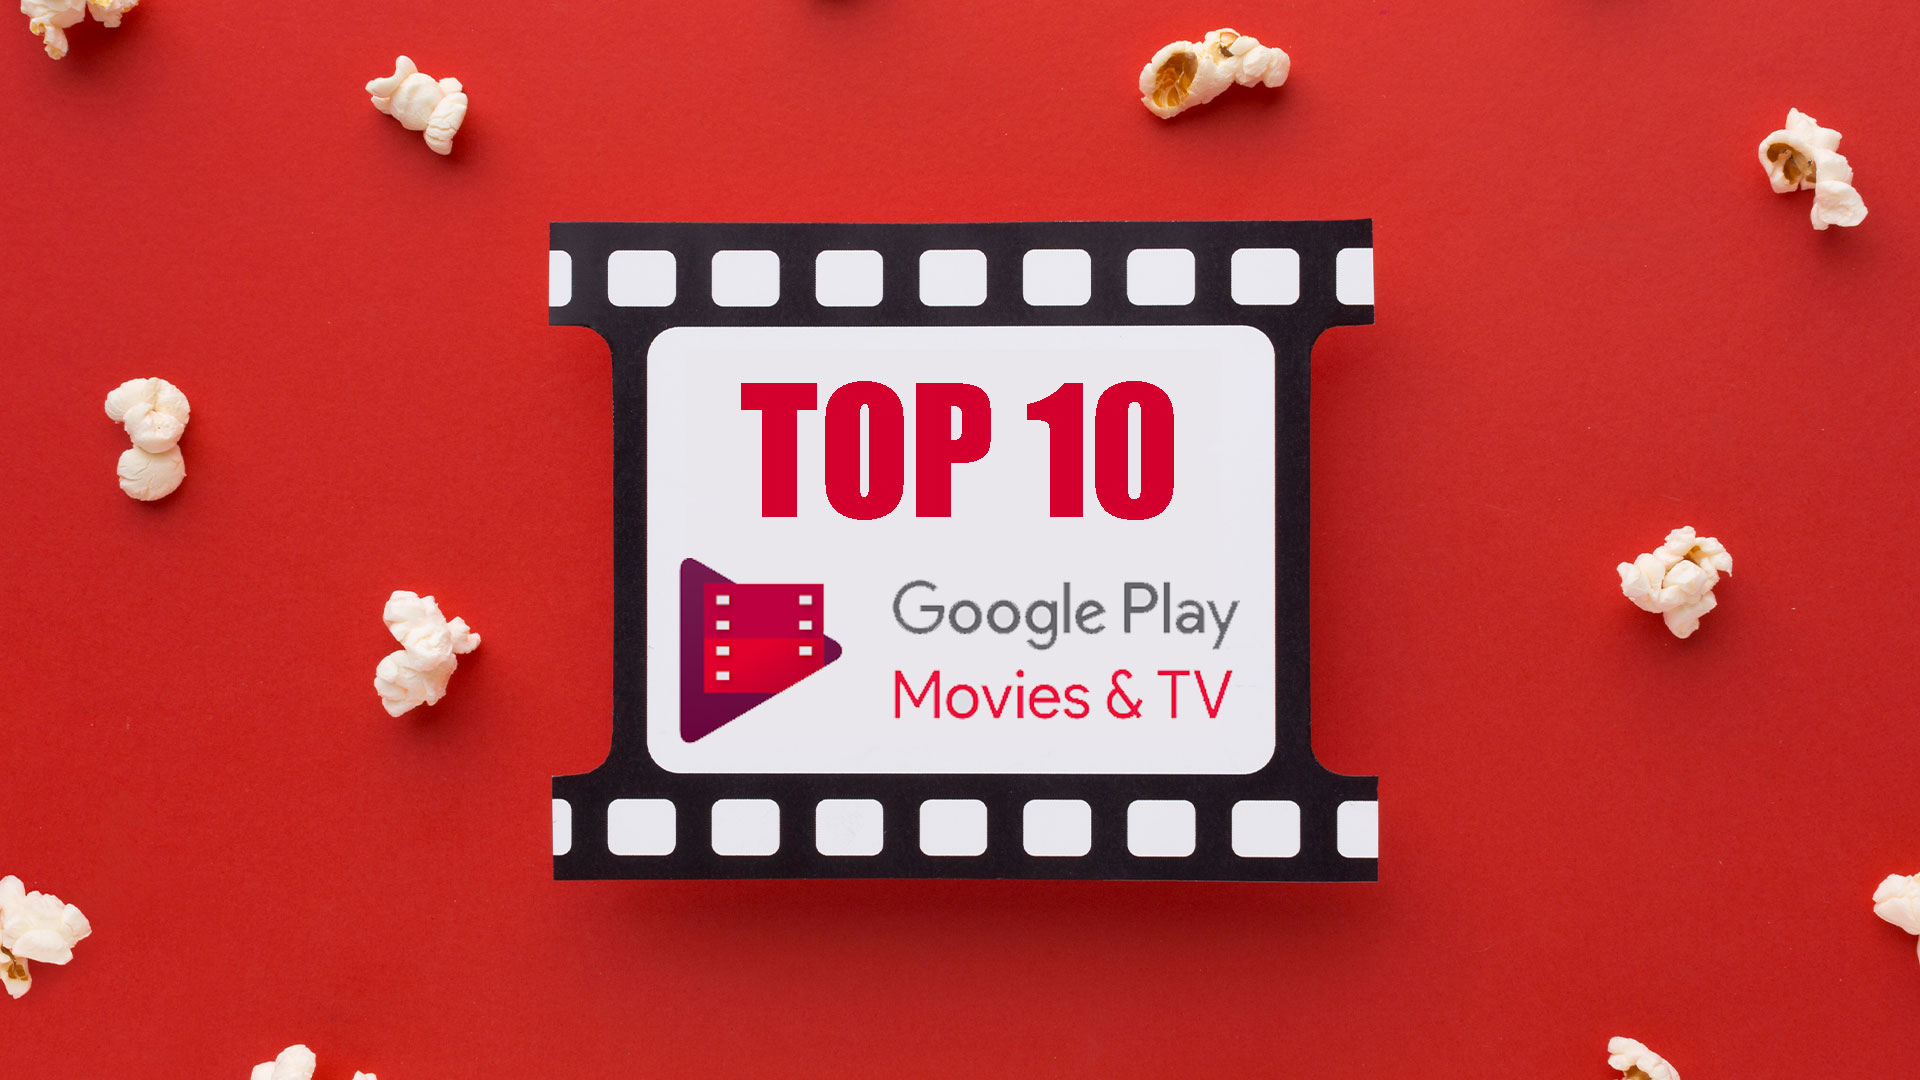 Google ranking in Spain: these are the favorite movies of the moment